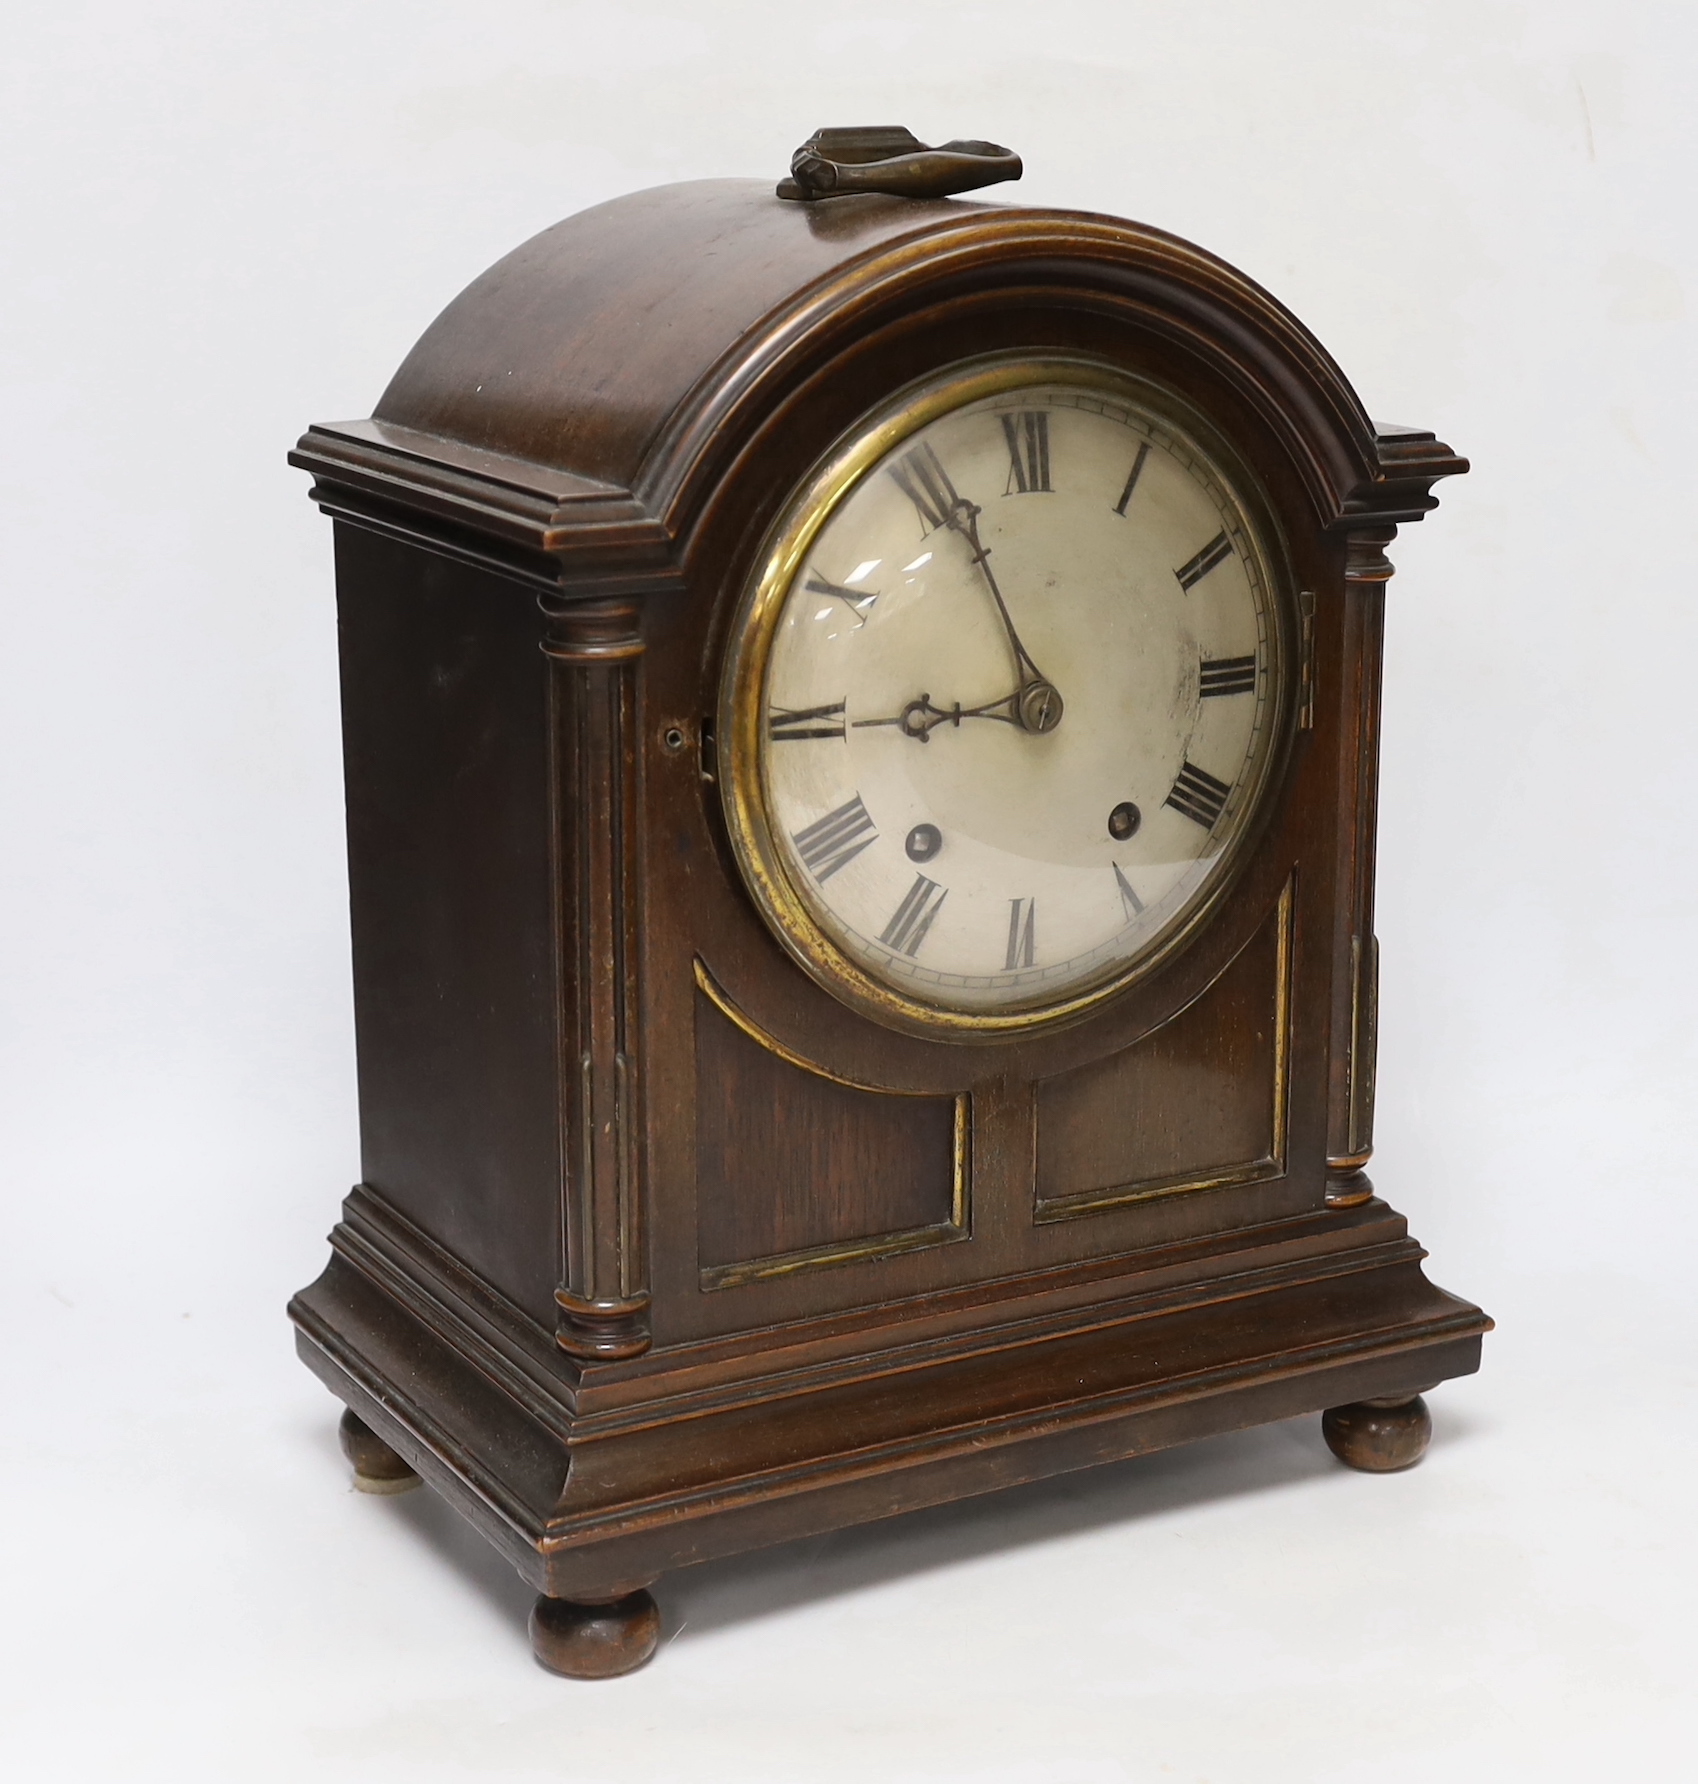 An Edwardian mantel clock, with two train movement, striking and chiming on five coiled gongs, 35cm excluding handle